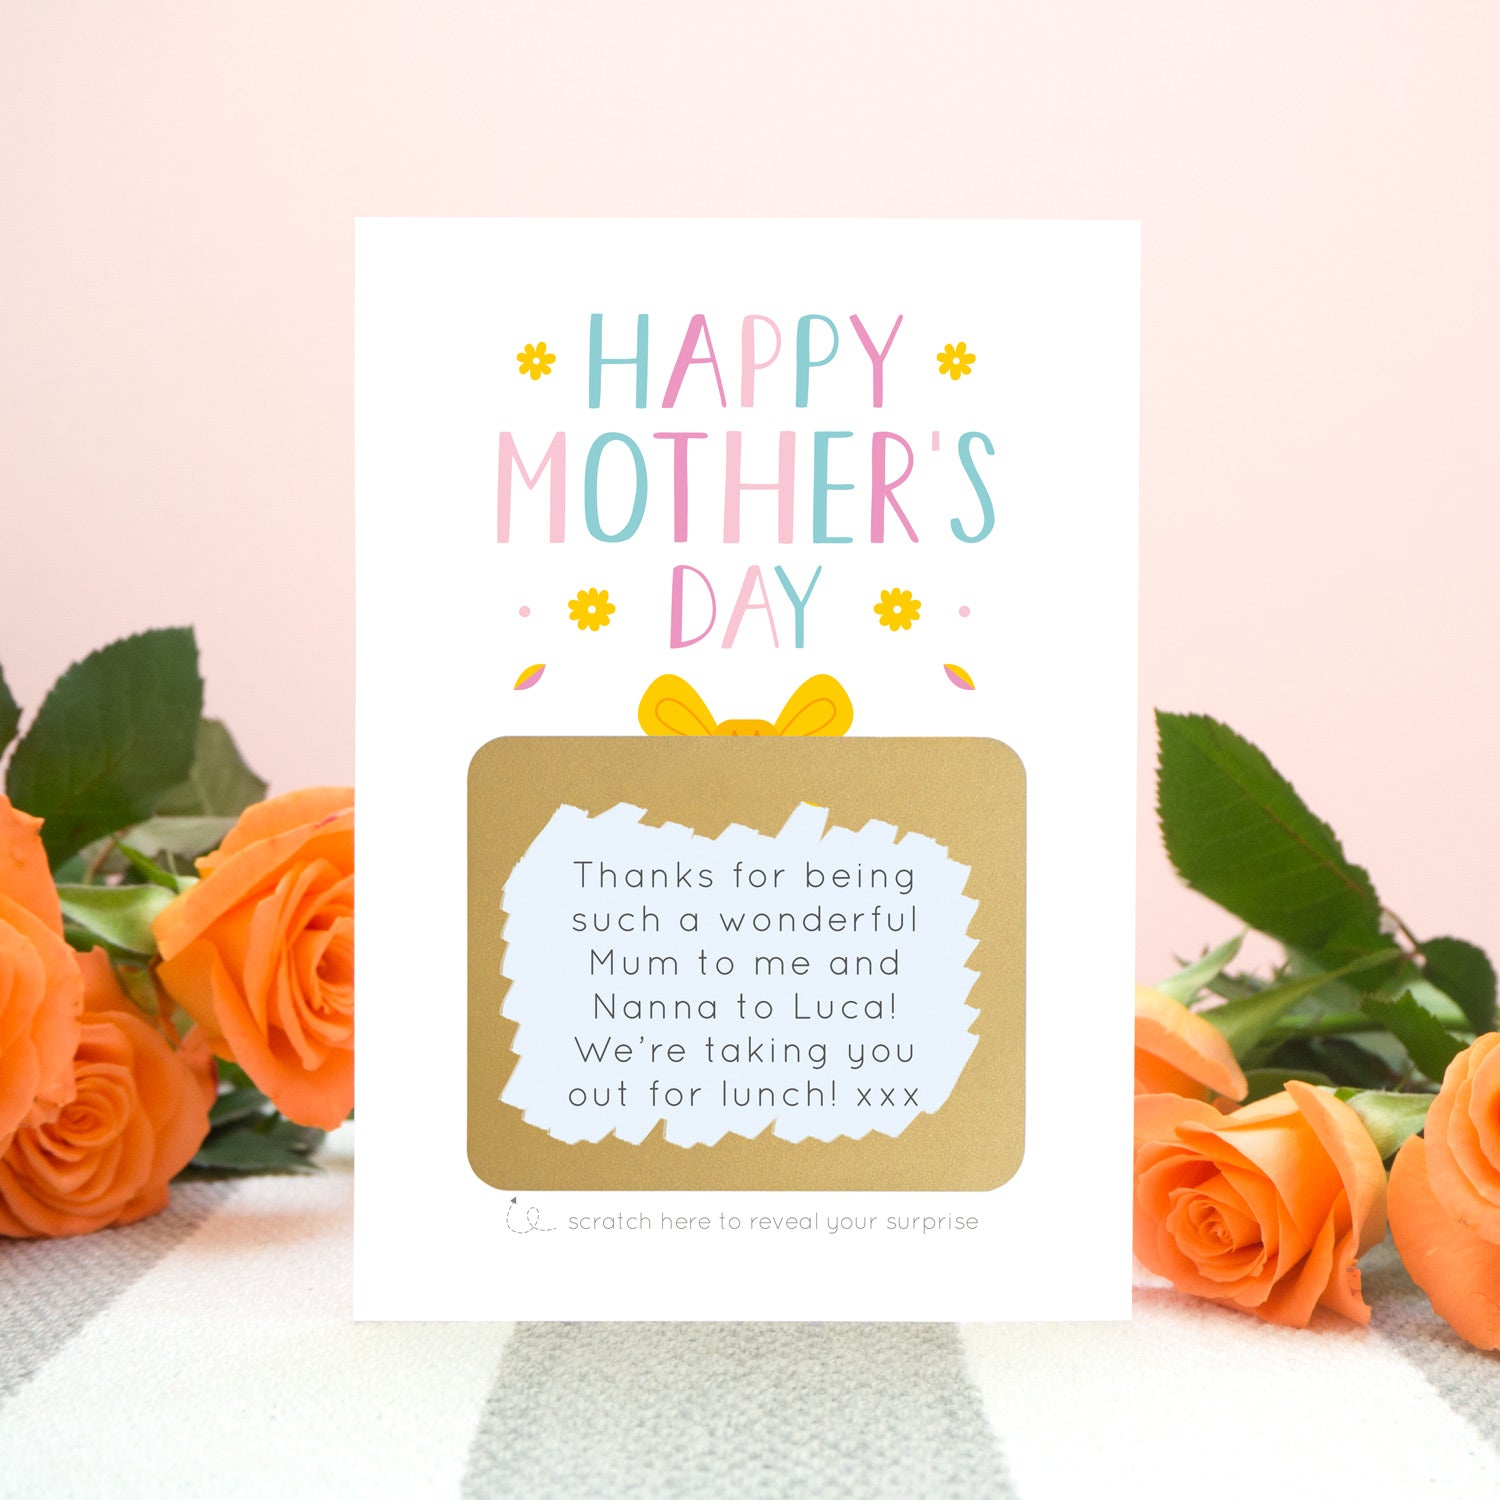 A mother’s day present scratch card standing in front of orange roses on a grey and white striped rug against a pink background. The card reads ‘Happy Mother’s day’ and the gold present has been scratched off to reveal a custom message to a mum. This card is in the pink and blue colour palette.